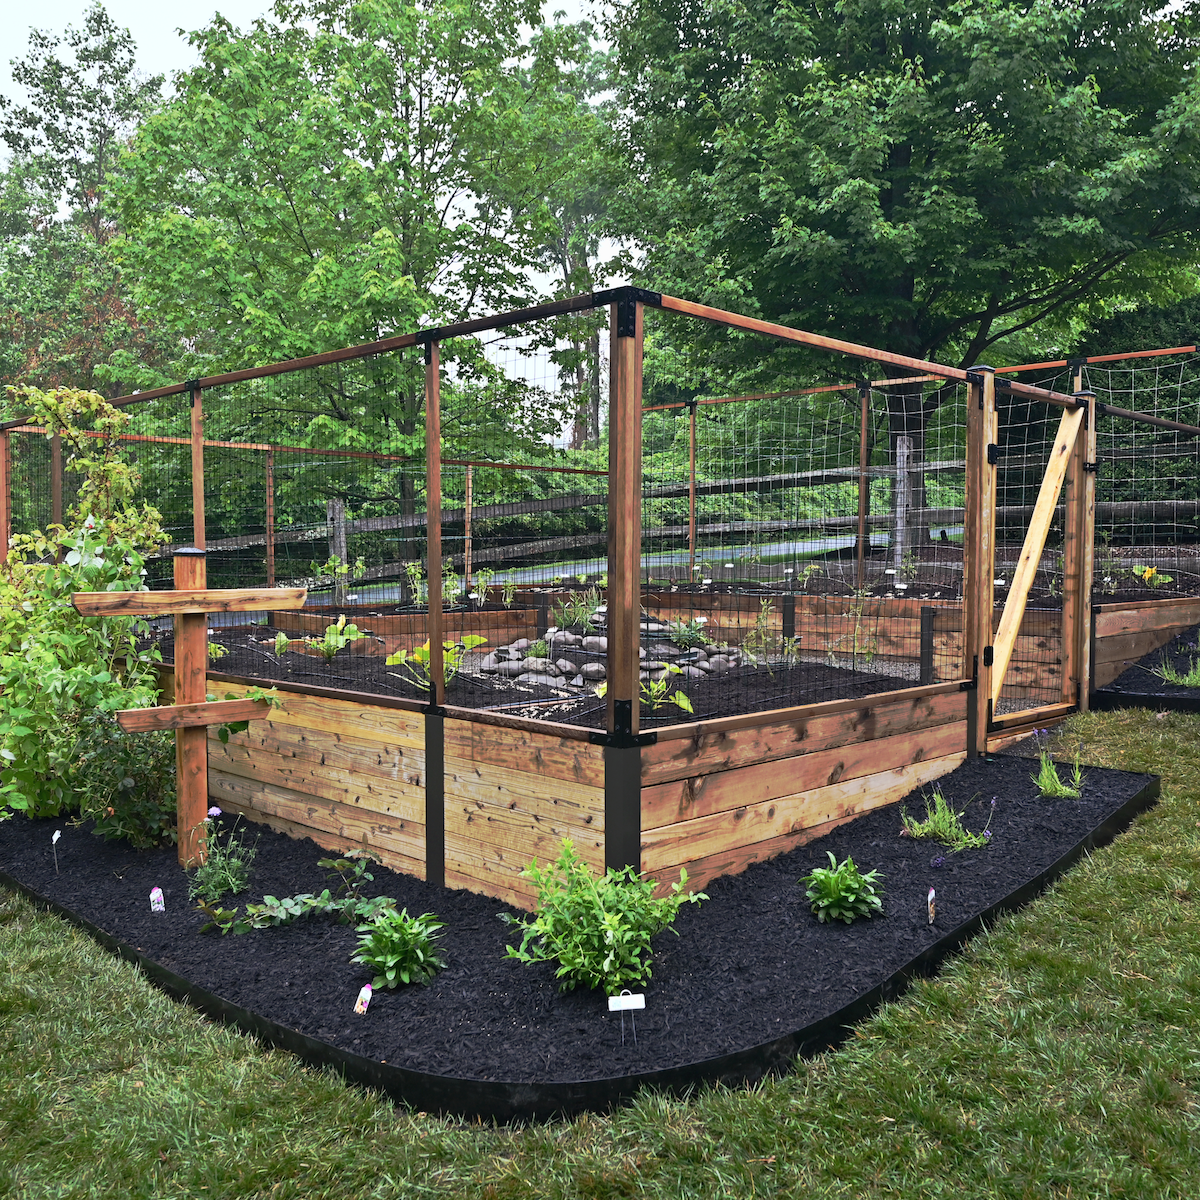 A wooden raised bed garden sits built into a heavily sloped lawn. A protective panel fence rises up out of the metal hardware of the raised beds.